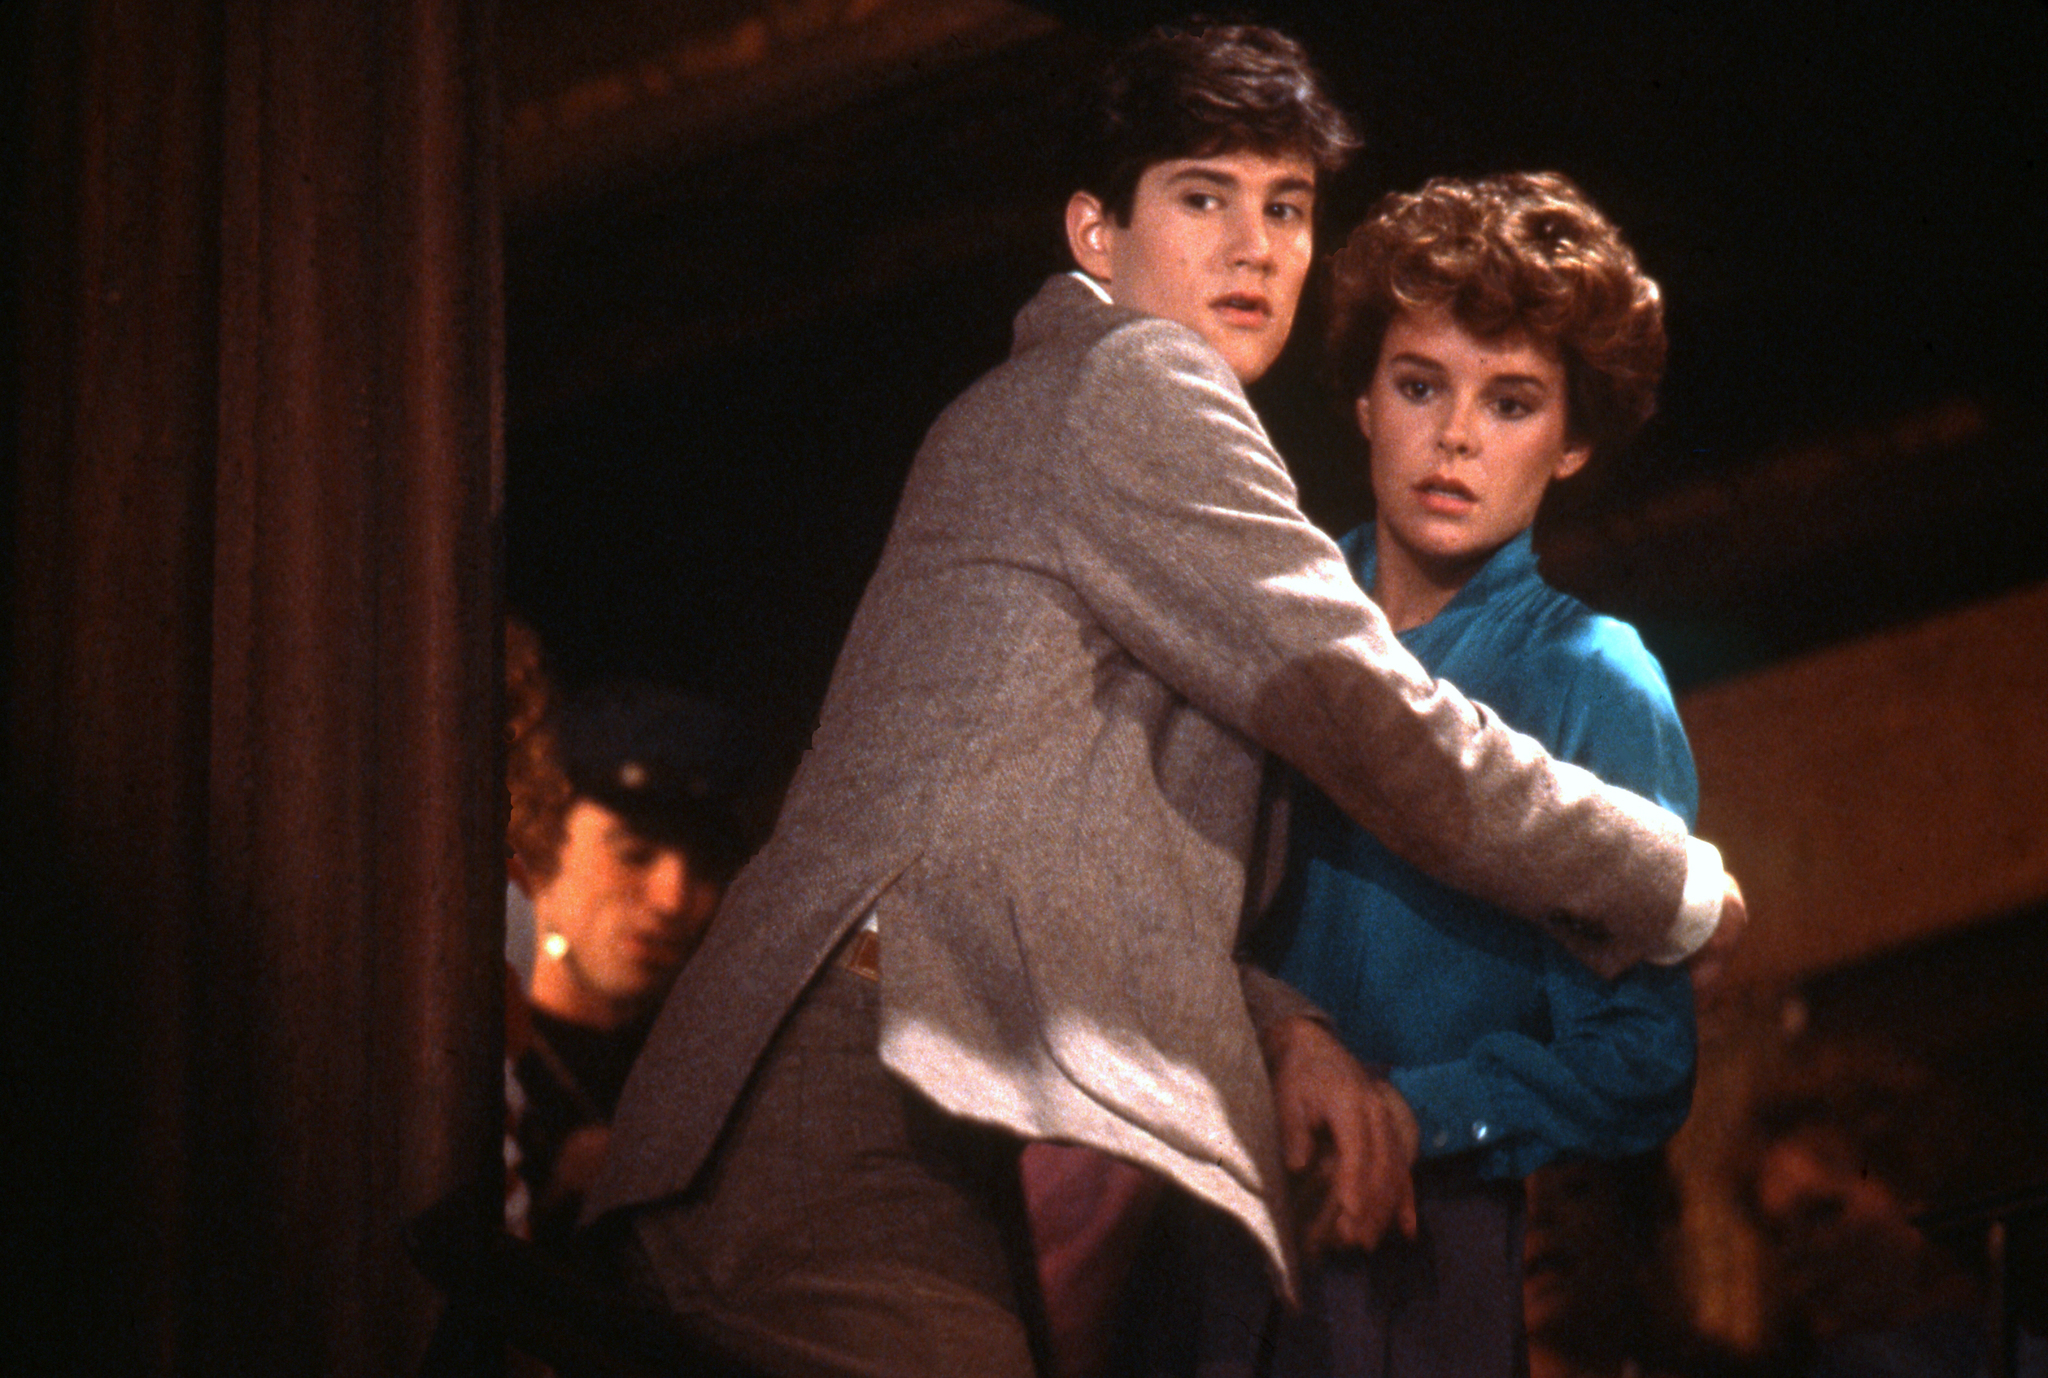 Still of Amanda Bearse and William Ragsdale in Fright Night (1985)